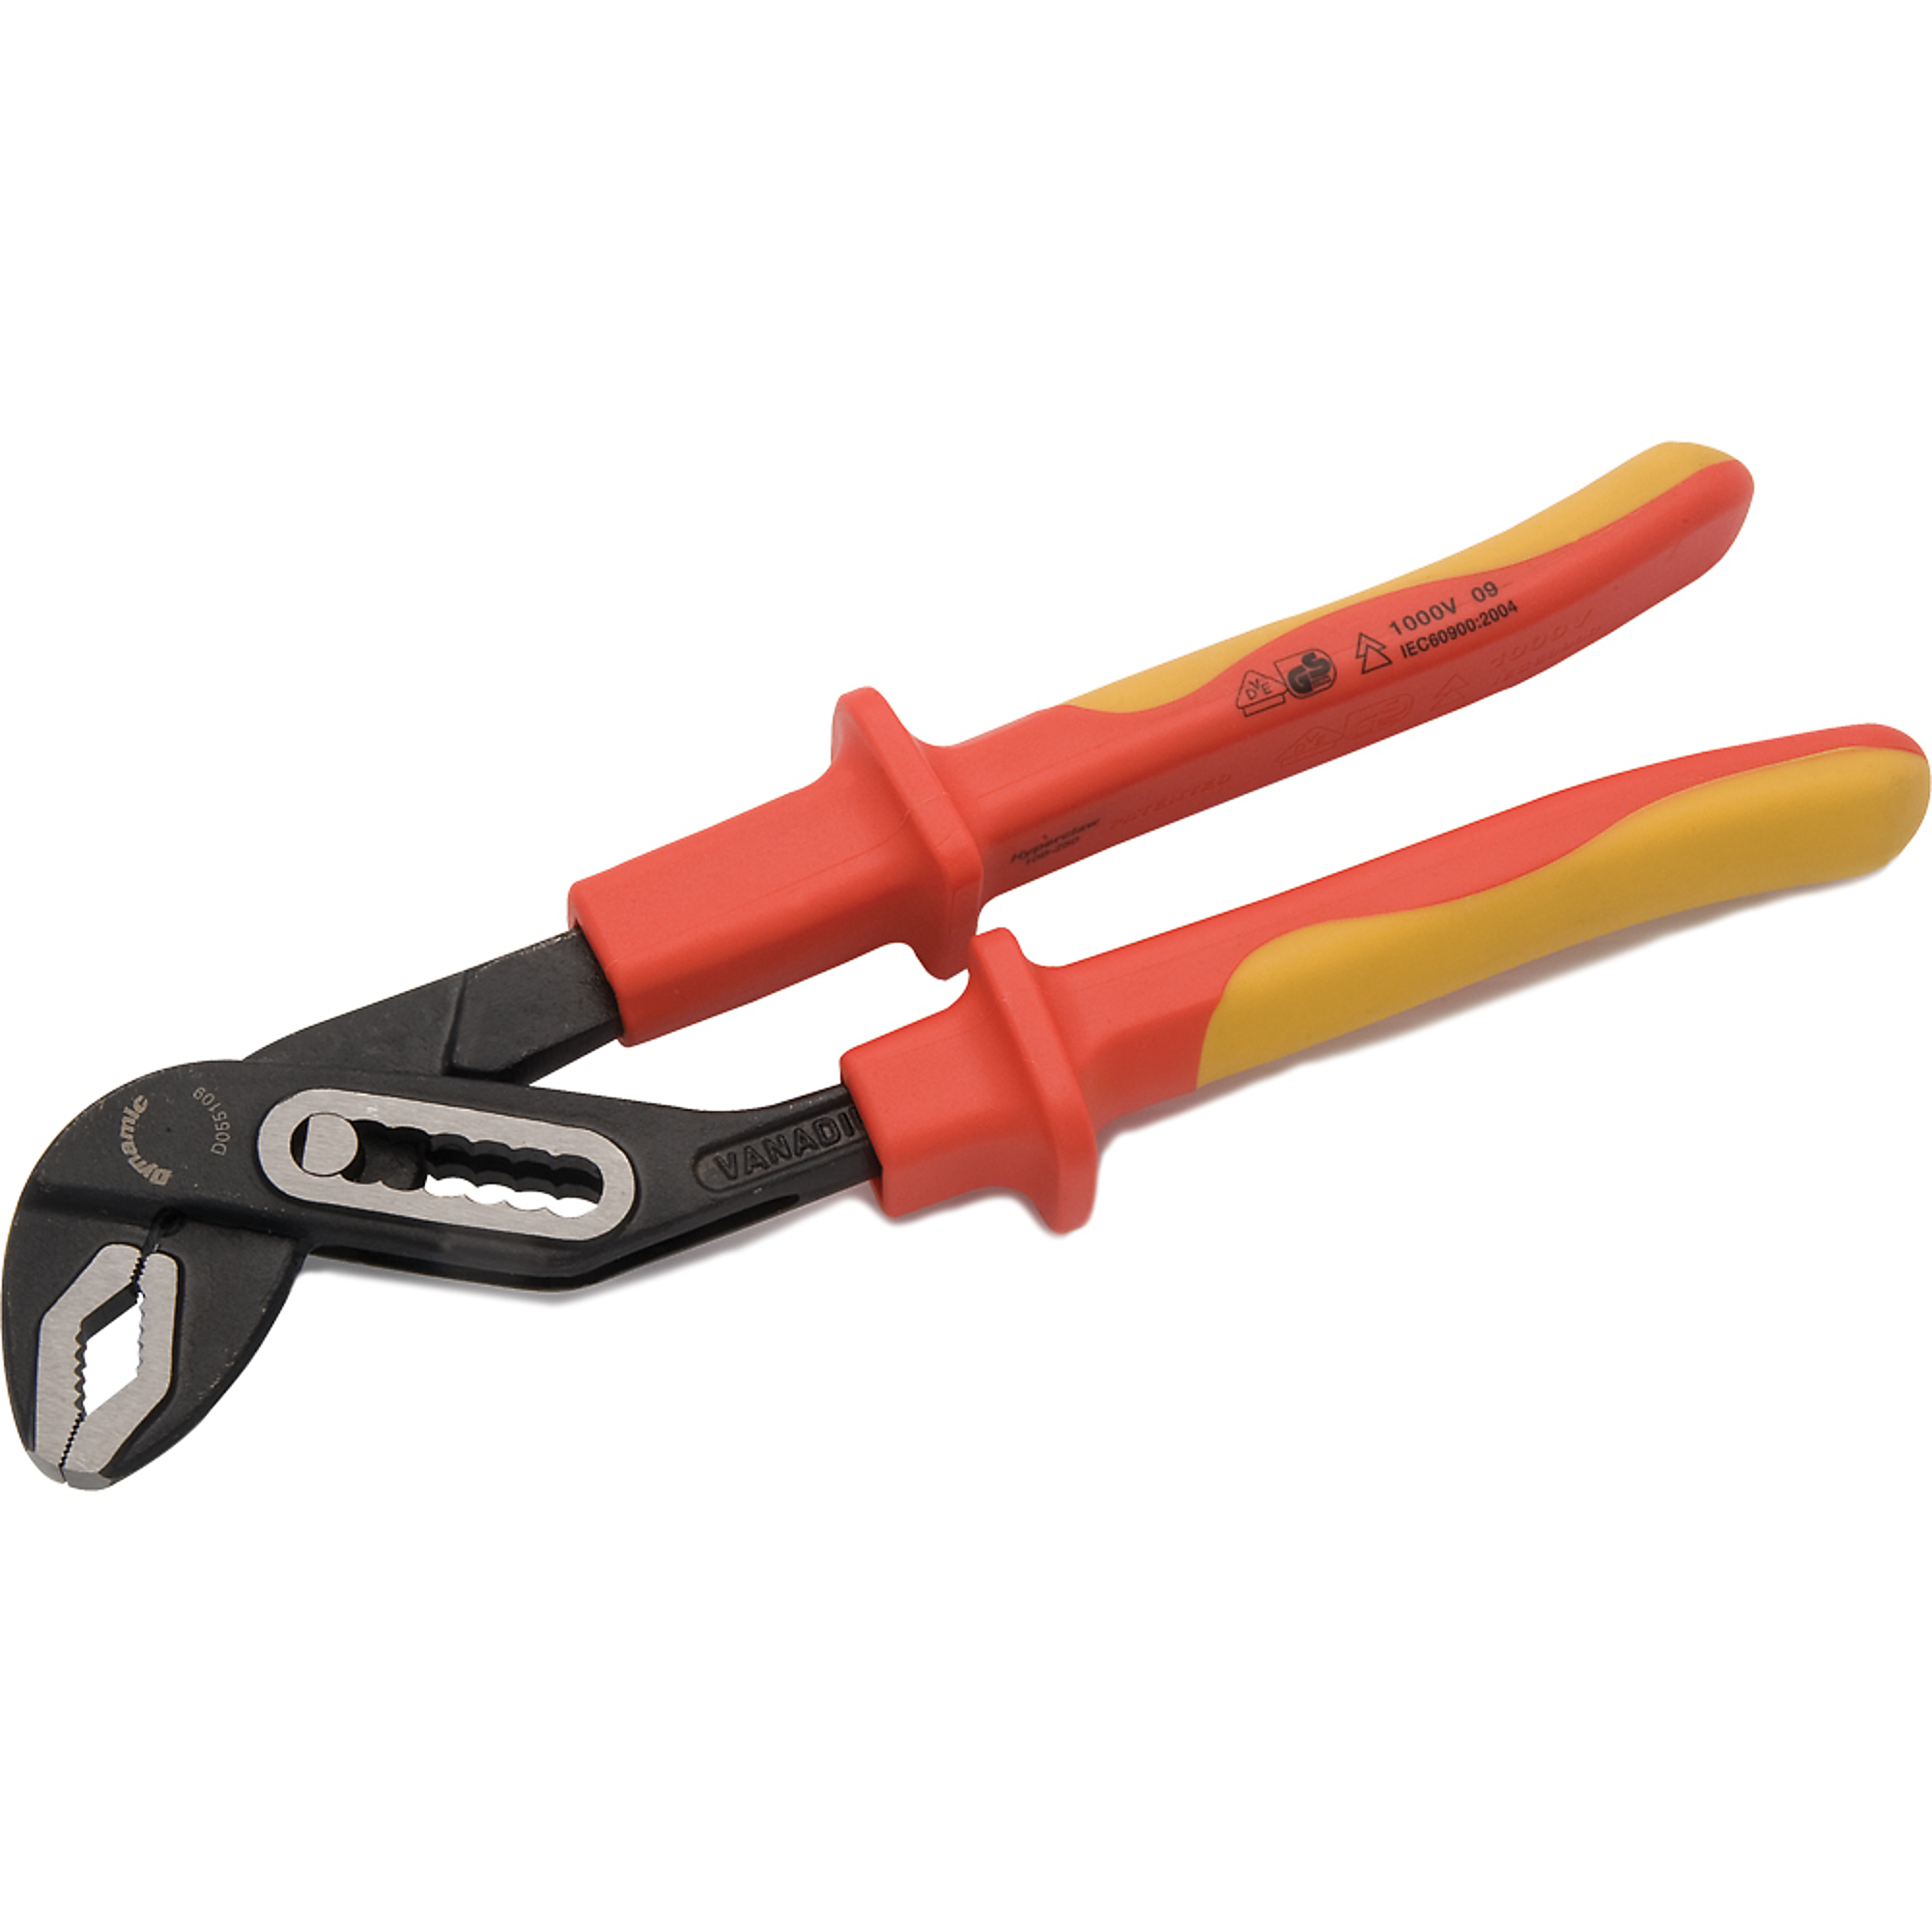 Dynamic Tools, 10Inch Box Joint Water Pump Pliers, Insulted Handle, Pieces (qty.) 1 Material Alloy Steel, Model D055109